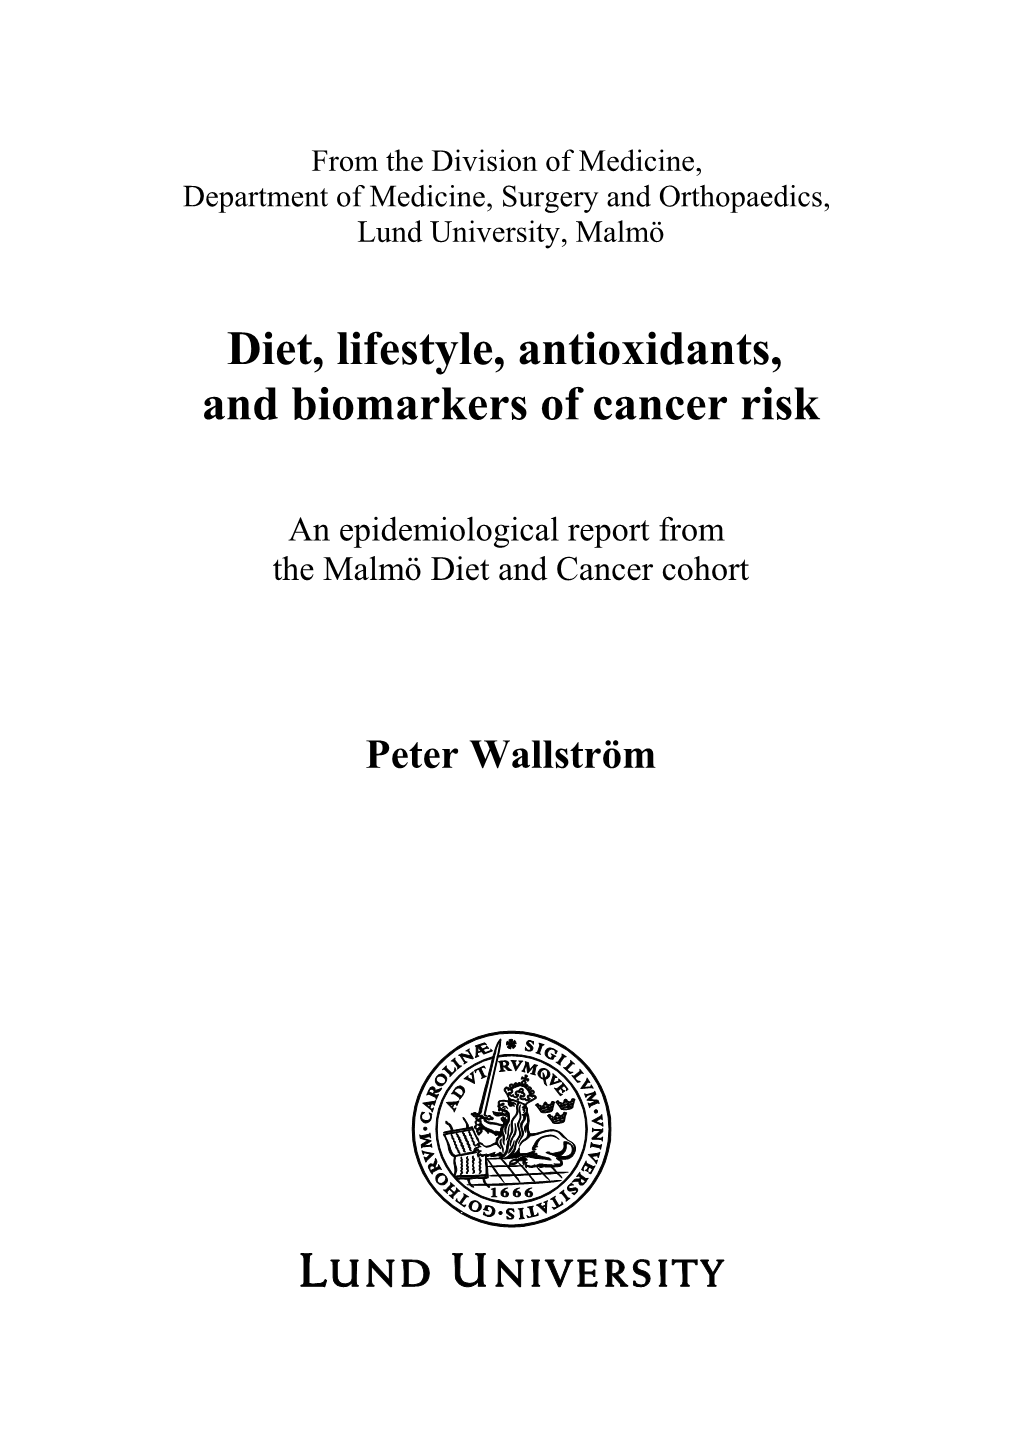 This Thesis Examines Associations Between a Number of Epidemiological Or Biological Markers